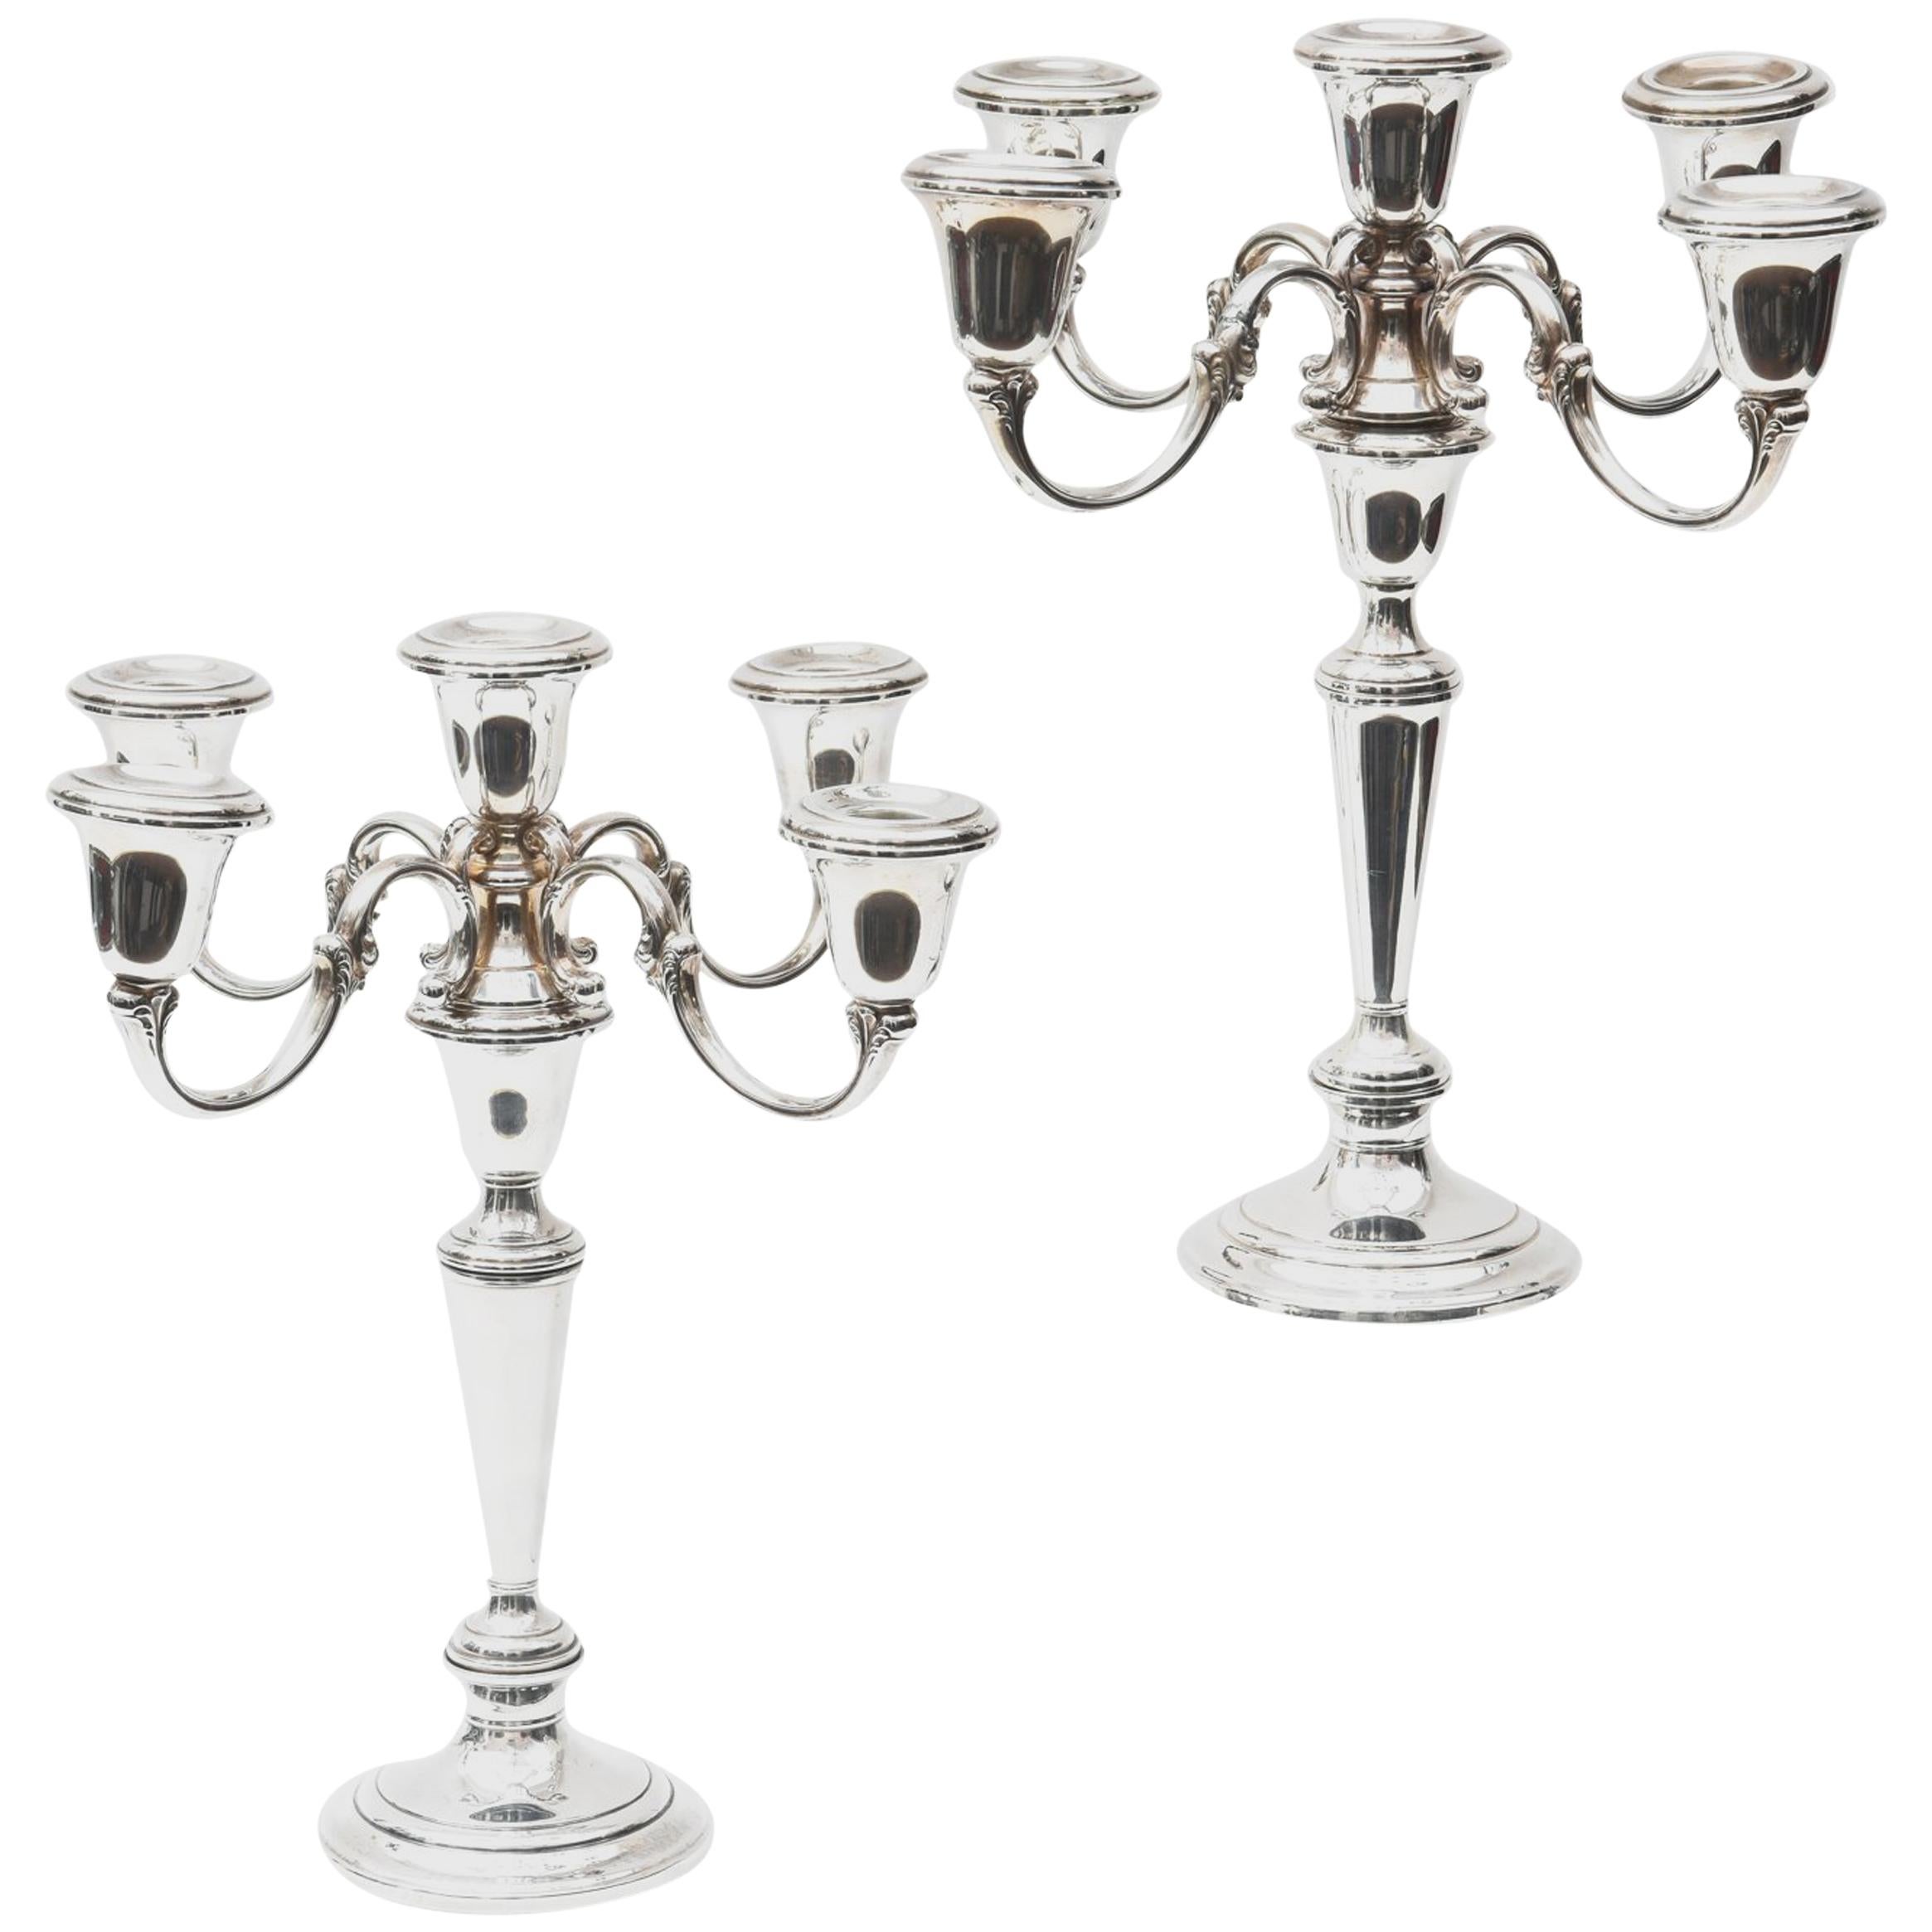 Pair of Gorham Sterling Candelabra, 4-Arm Tall and Also Convertible